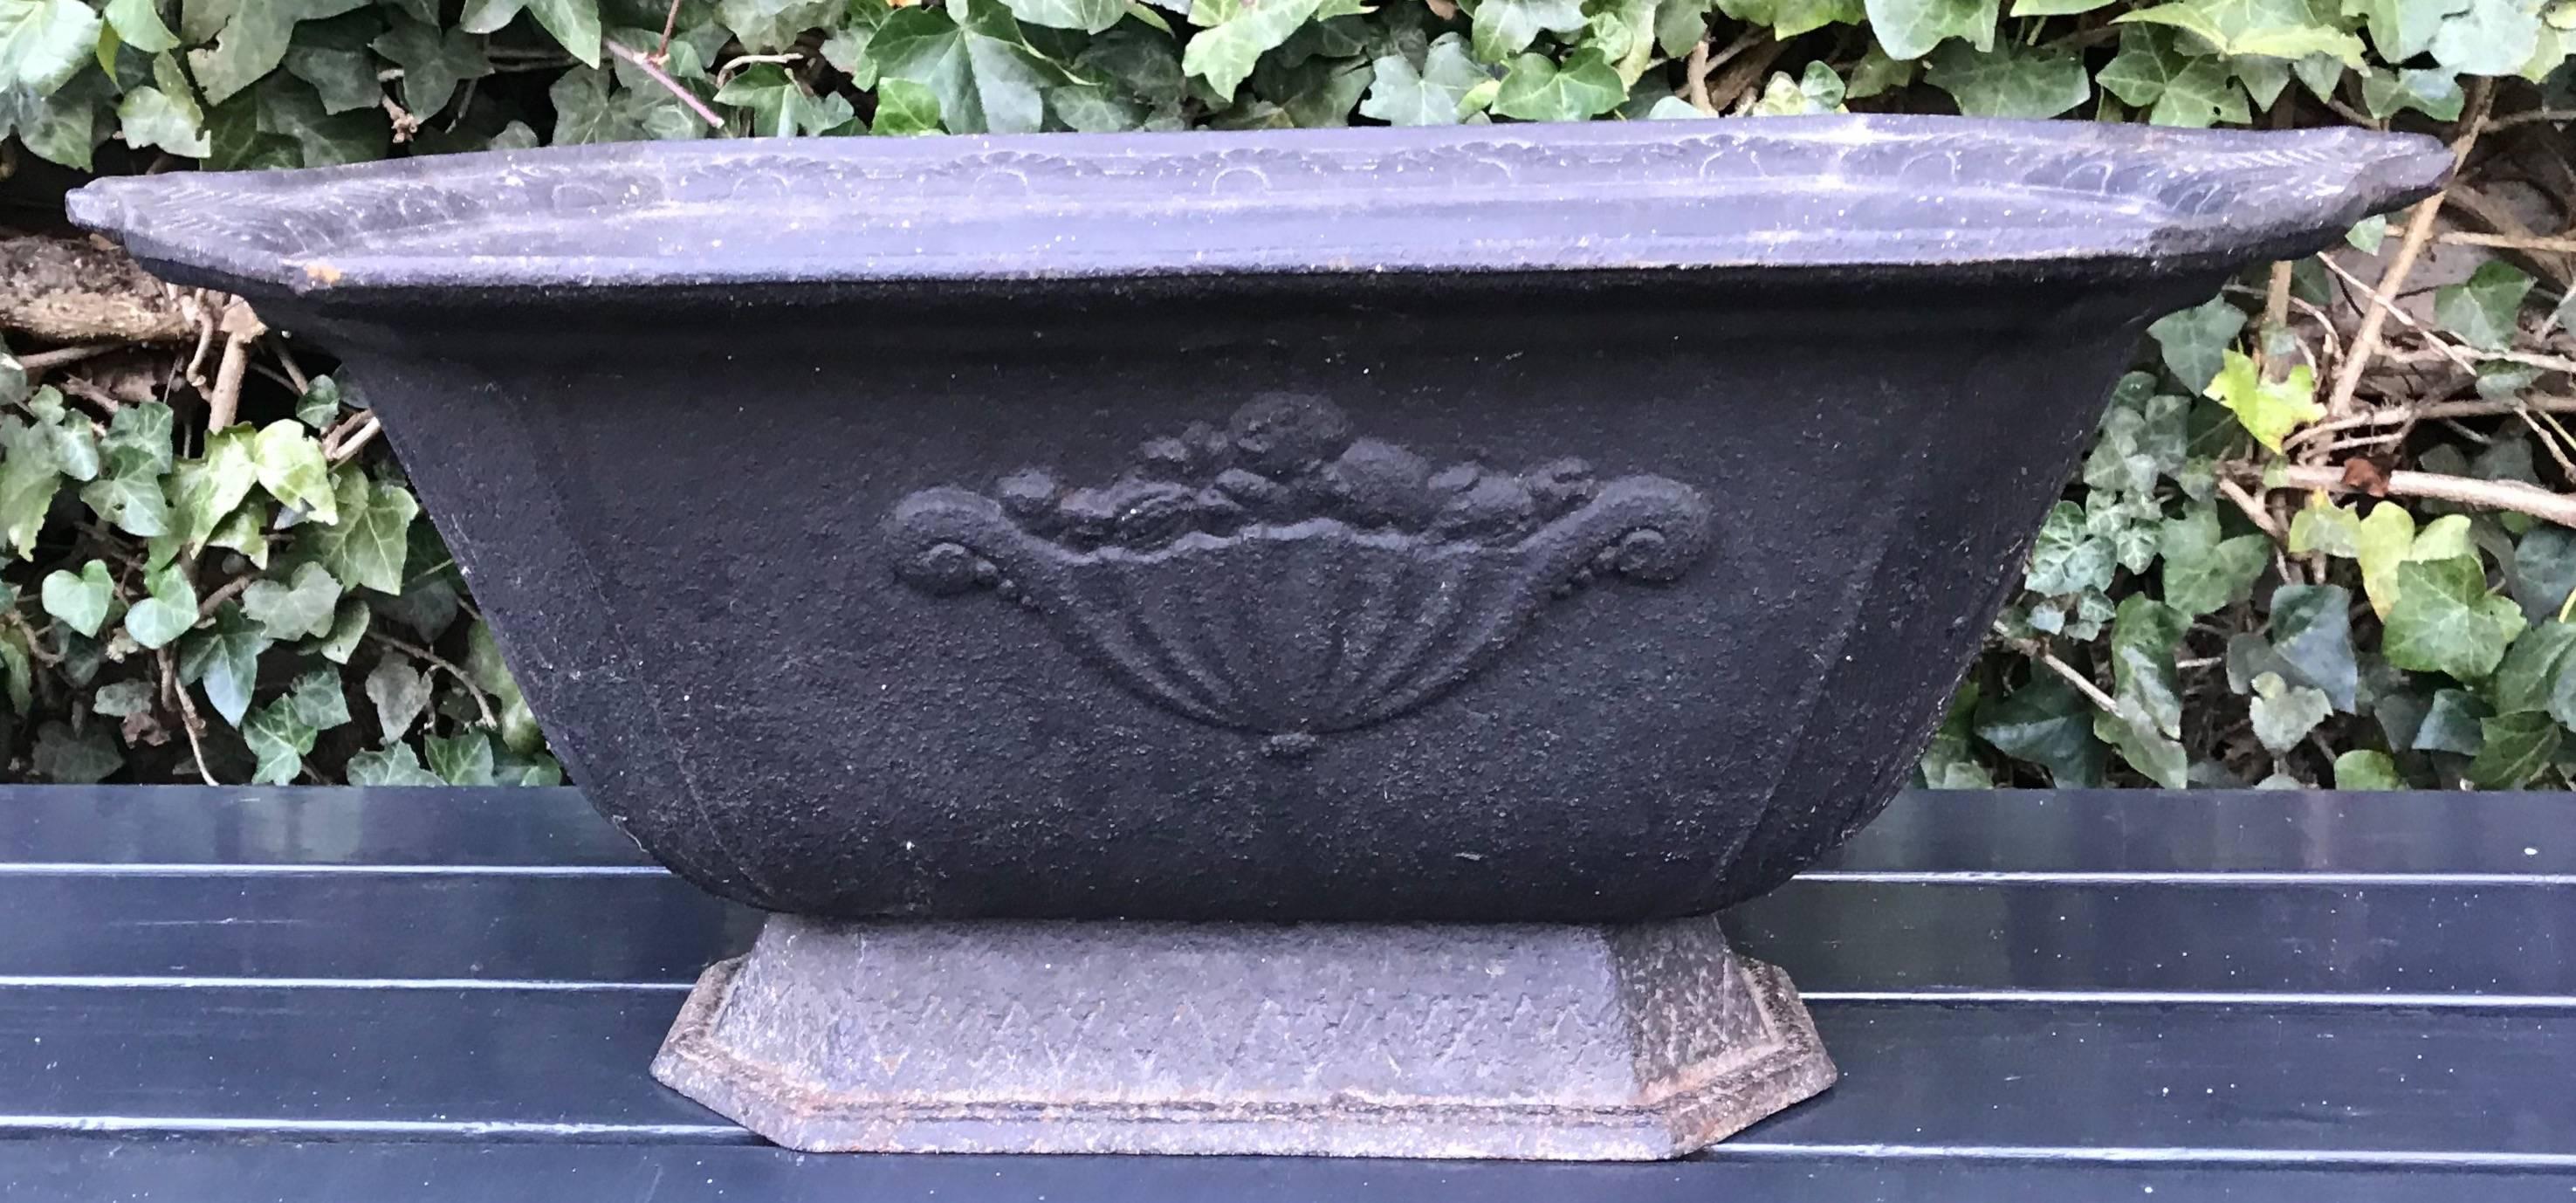 Beautifully shaped, cast iron planter.

This stylish, classical look planter is in excellent condition. Thanks to the shape and thanks to the organic and flowing motifs this cast iron beauty will look great both indoors and outdoors. Filled with low